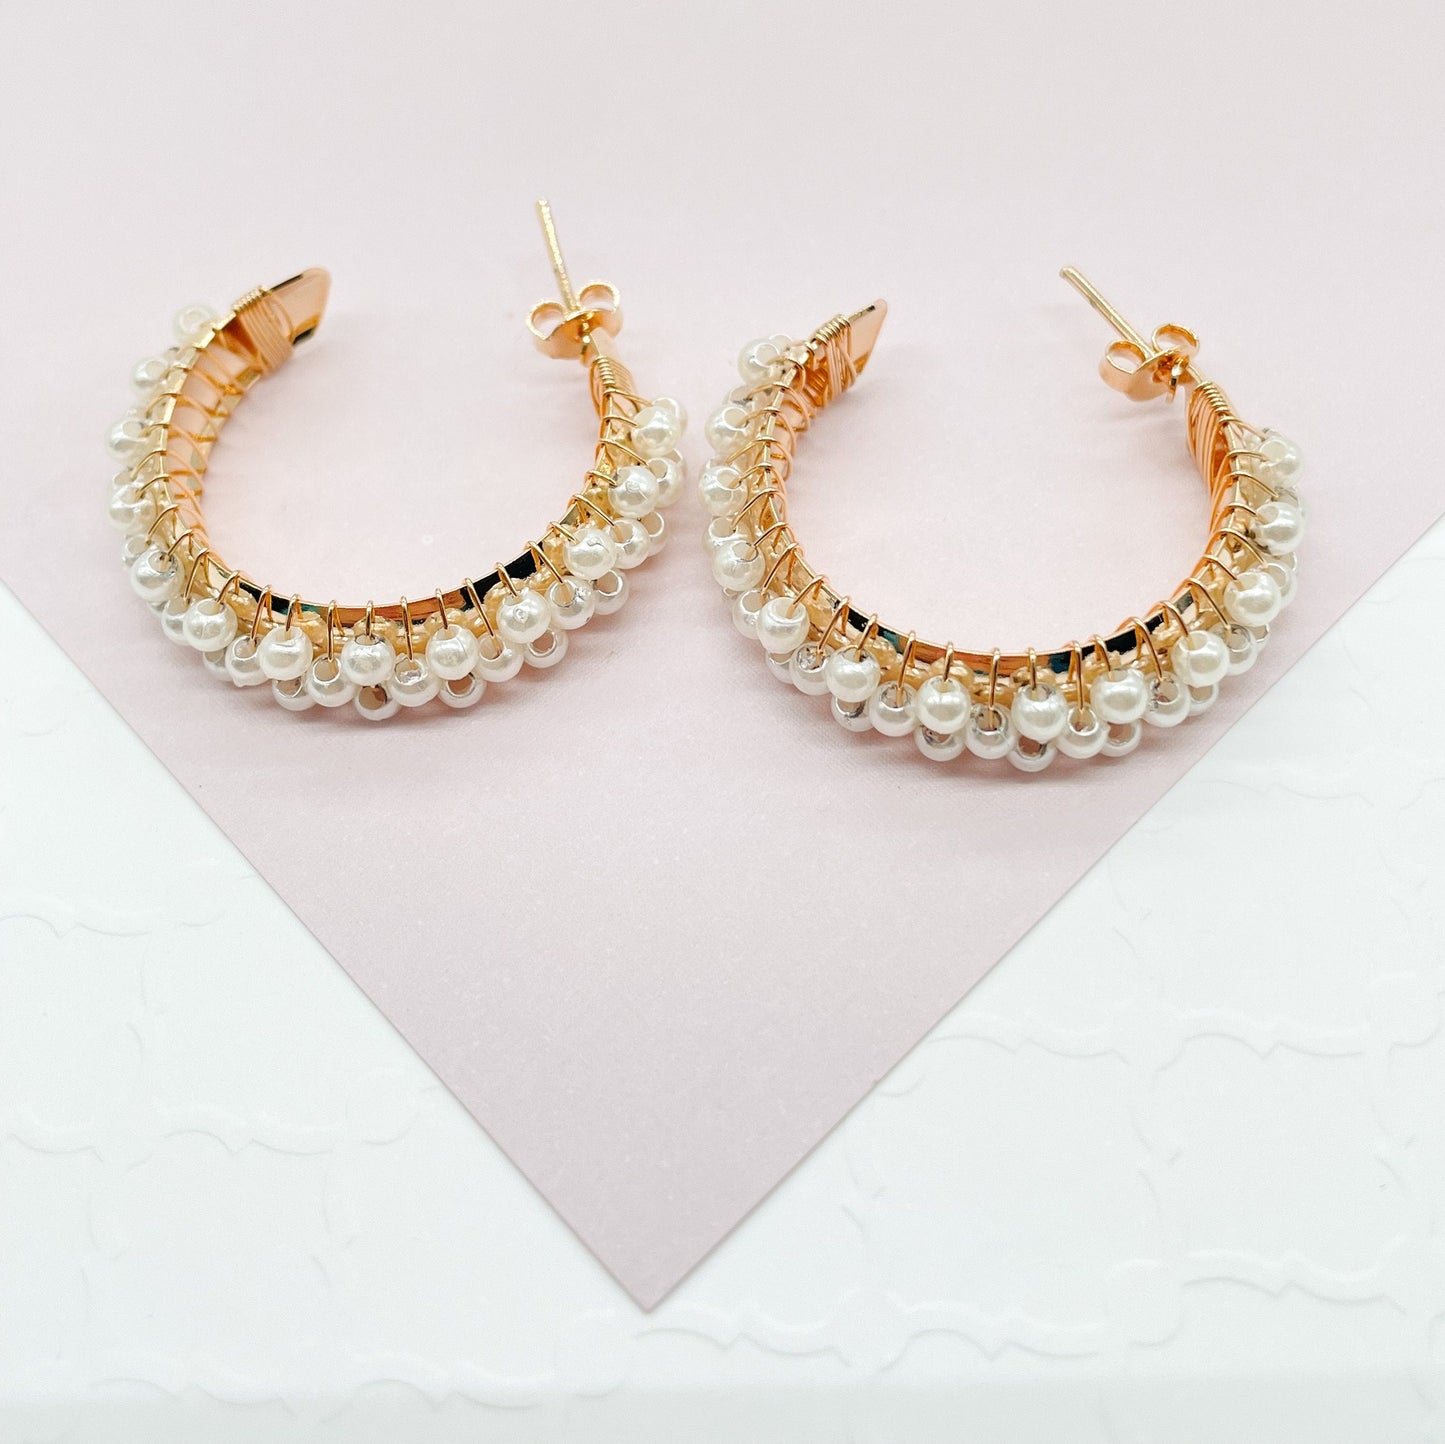 18k Gold filled Hoop Earrings Featuring A Wire Wrap of Pearls Around The Hoop